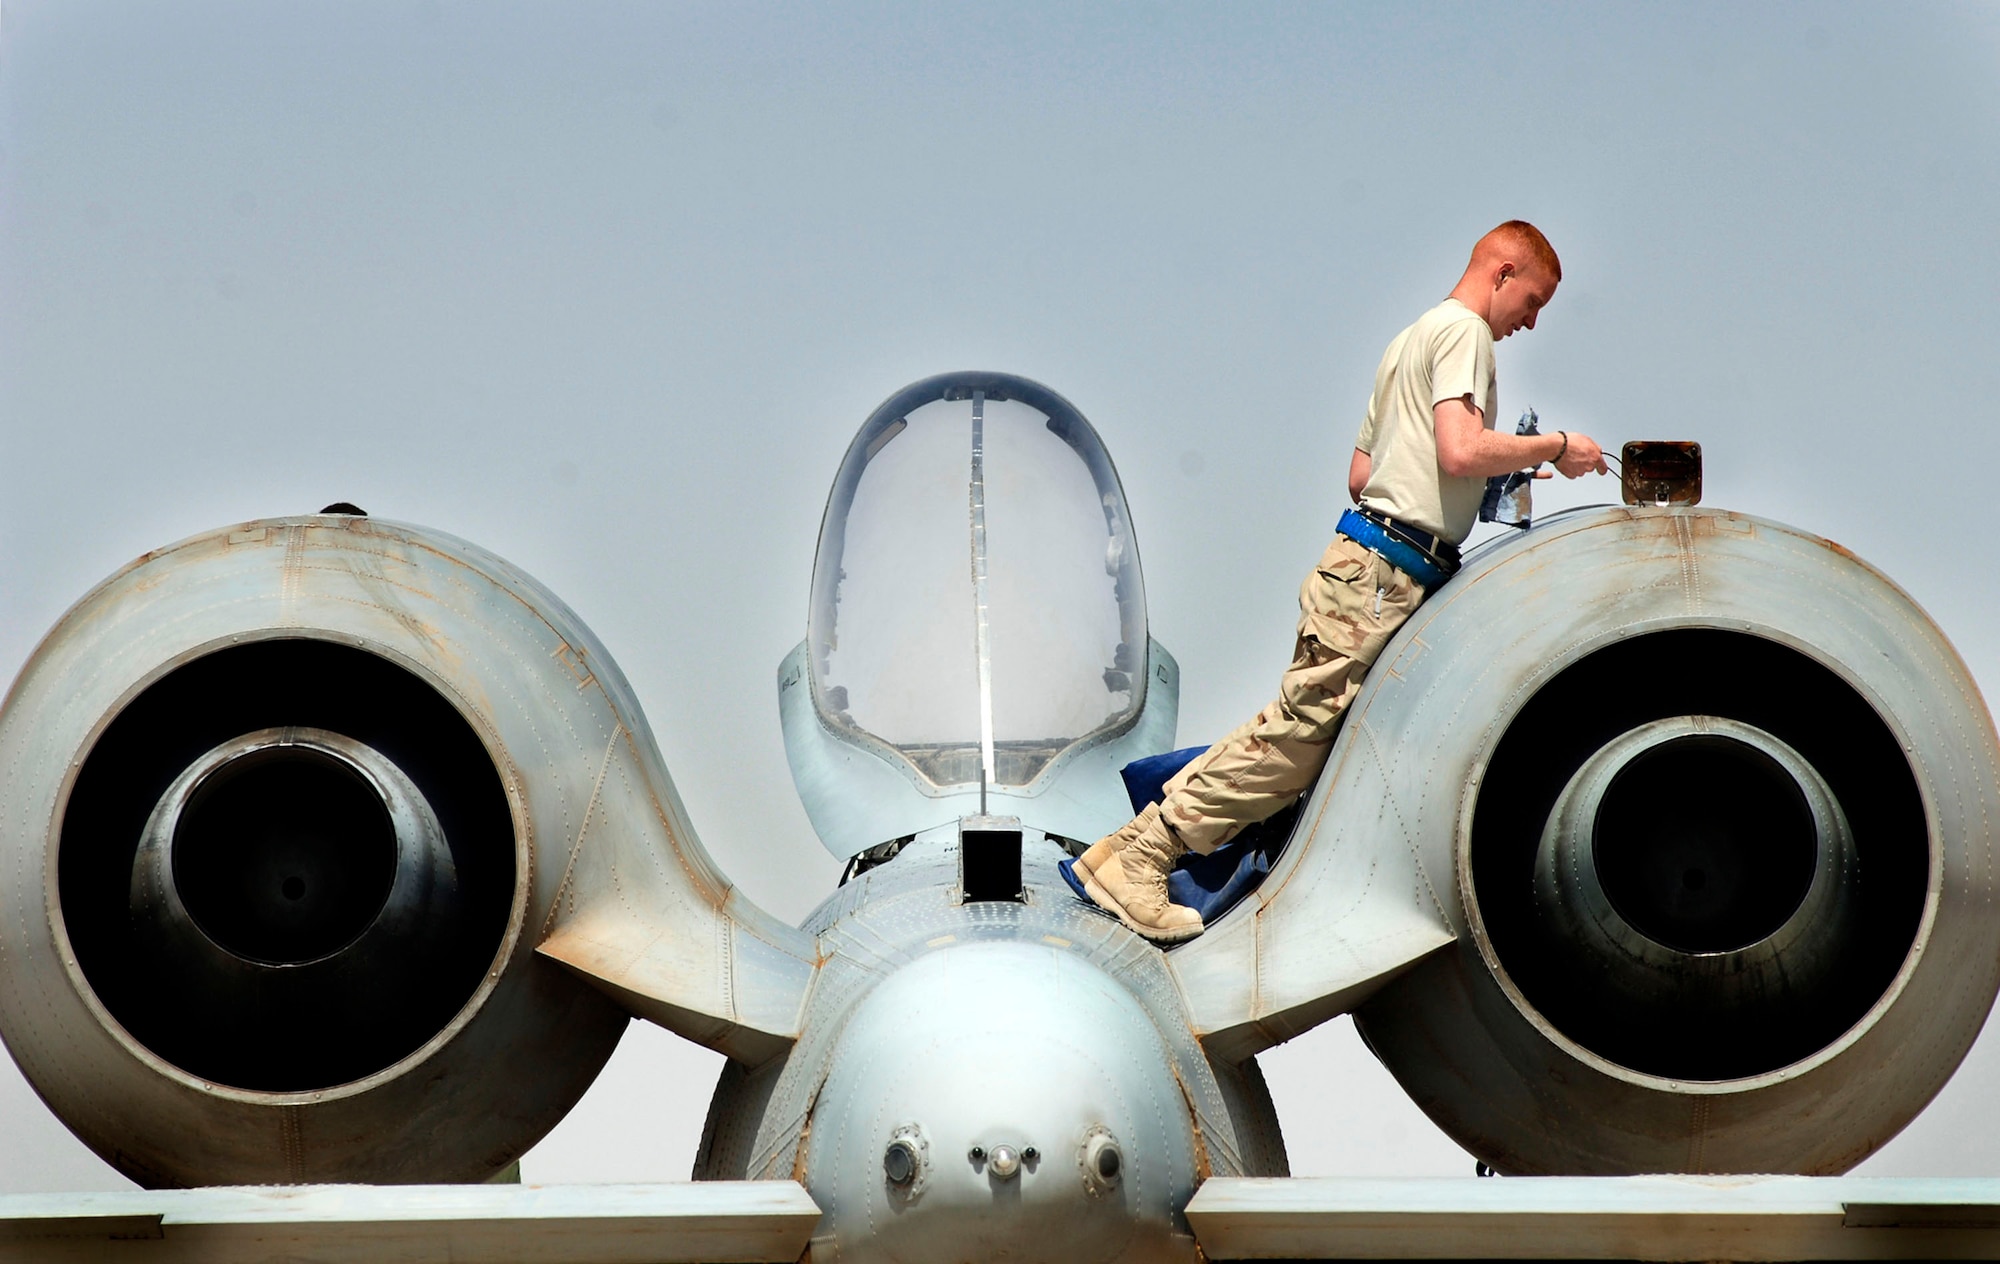 Senior Airman Kevin Crawford performs an intake and exhaust inspection on an A-10 Thunderbolt II April 25 at Al Asad Air Base, Iraq. A-10s provide close-air support to ground troops in Iraq. The 438th Air Expeditionary Group A-10s perform approximately 10 sorties daily. Airman Crawford is assigned to the 438th AEG. His hometown is Boling Brook, Ill. (U.S. Air Force photo/Tech. Sgt. Cecilio M. Ricardo Jr.) 